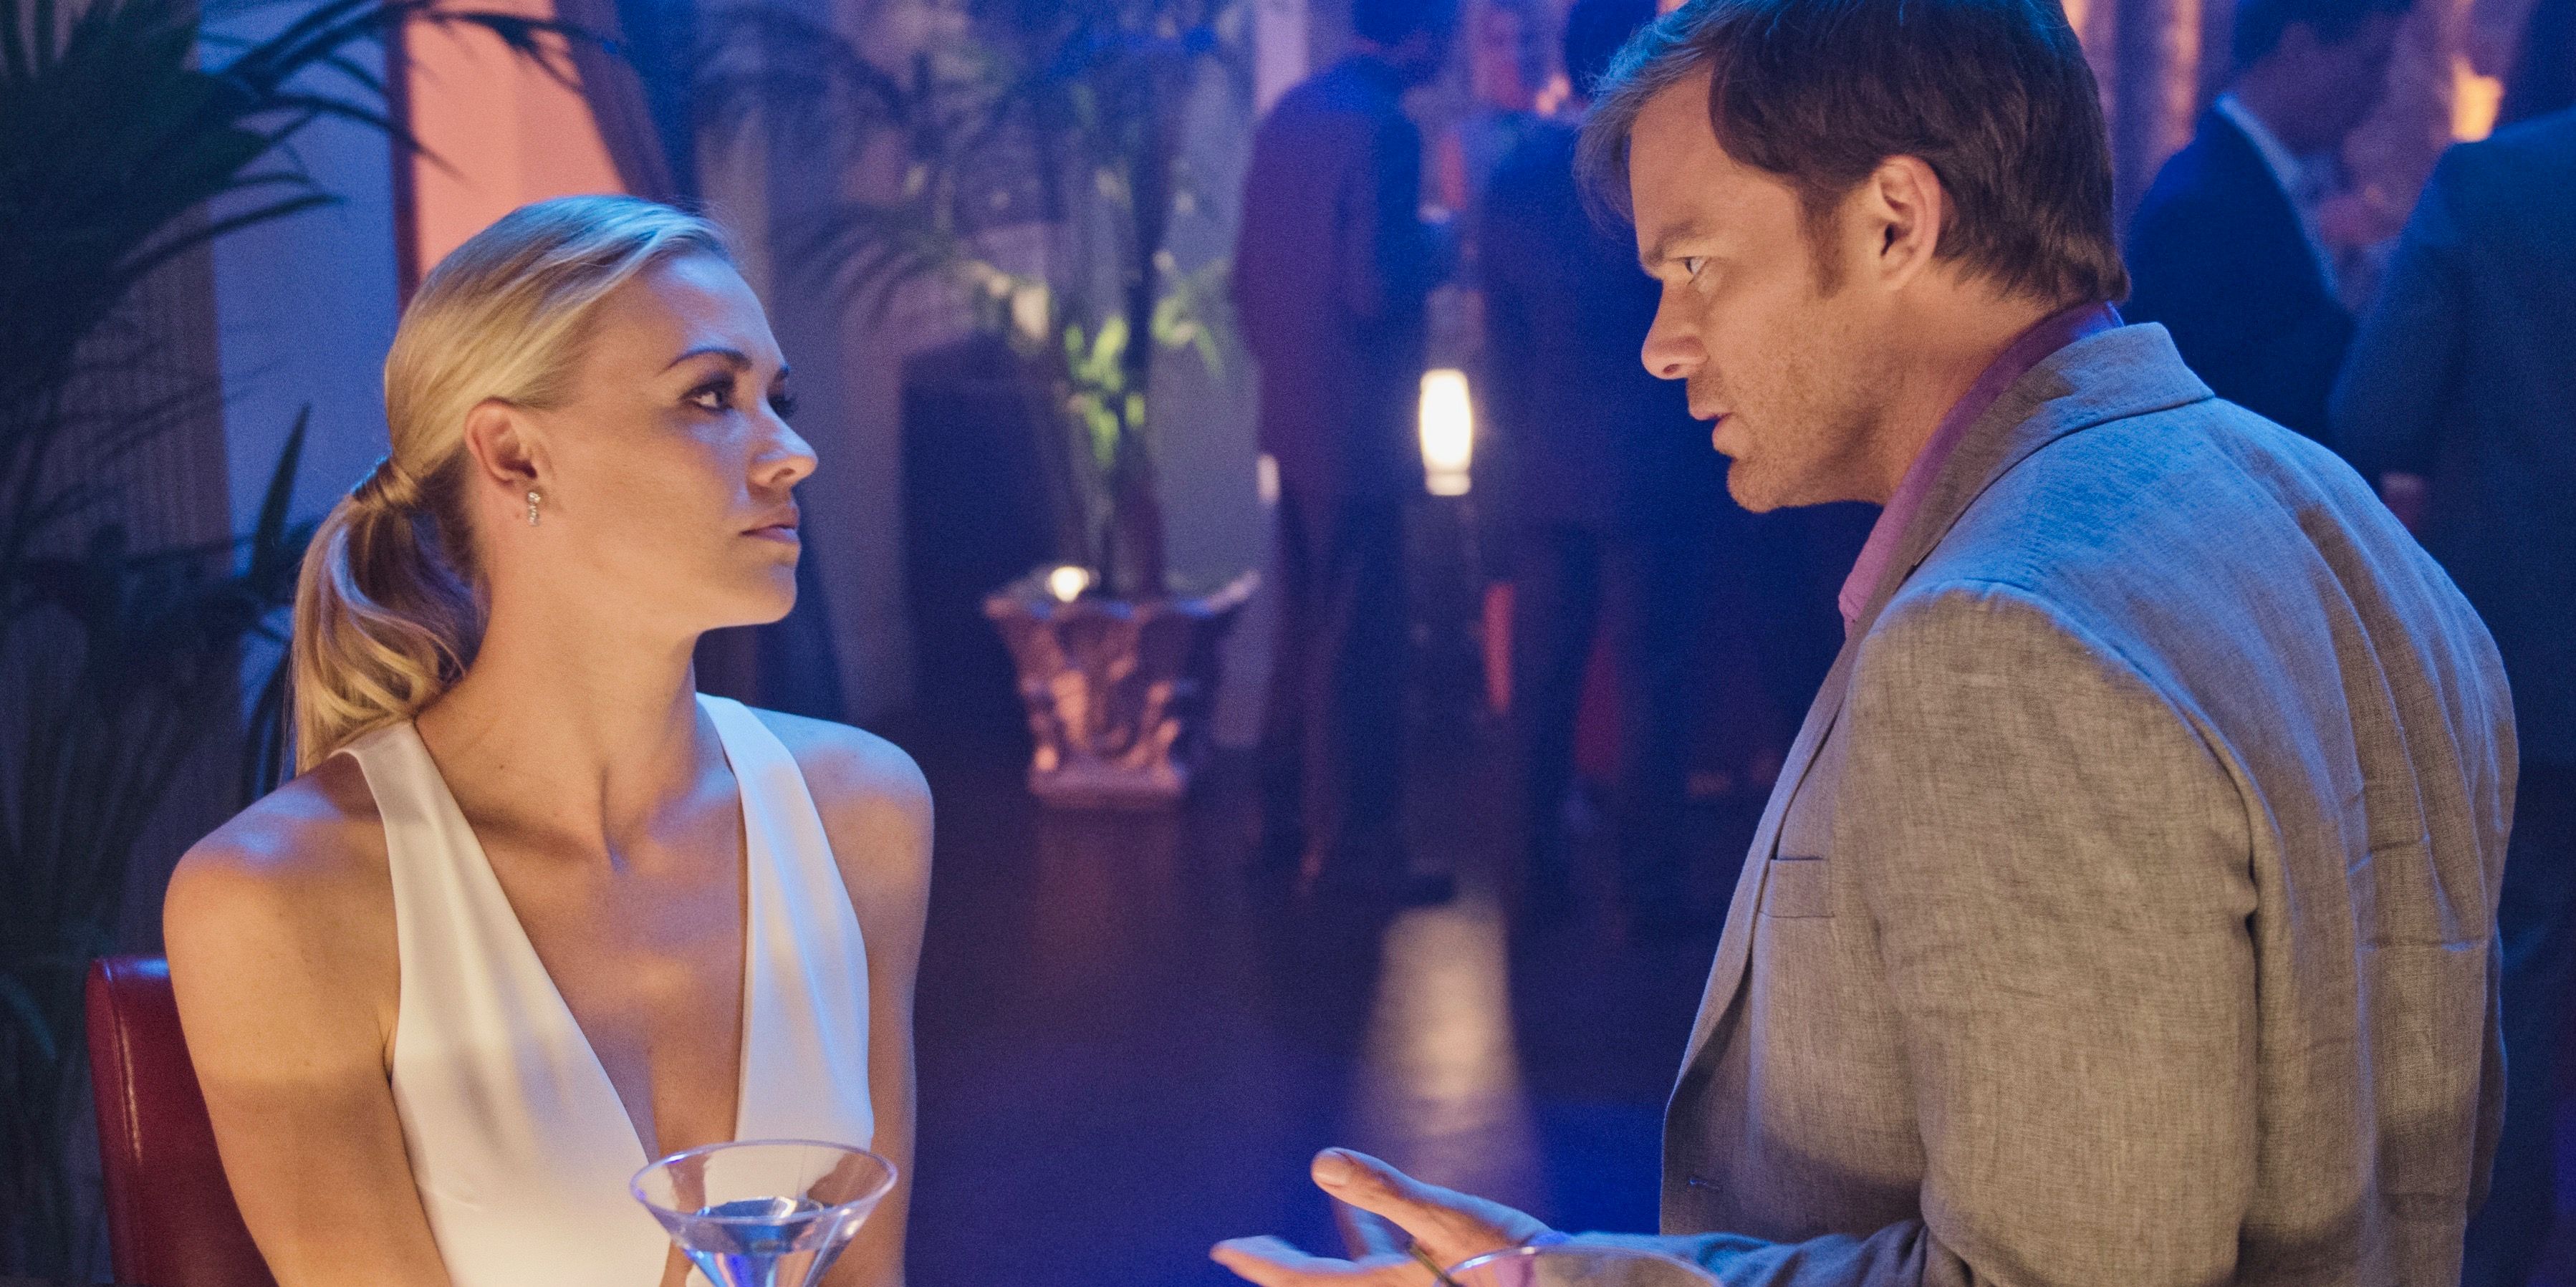 Michael C Hall as Dexter and Yvonne Strahovski as Hannah McKay in Dexter